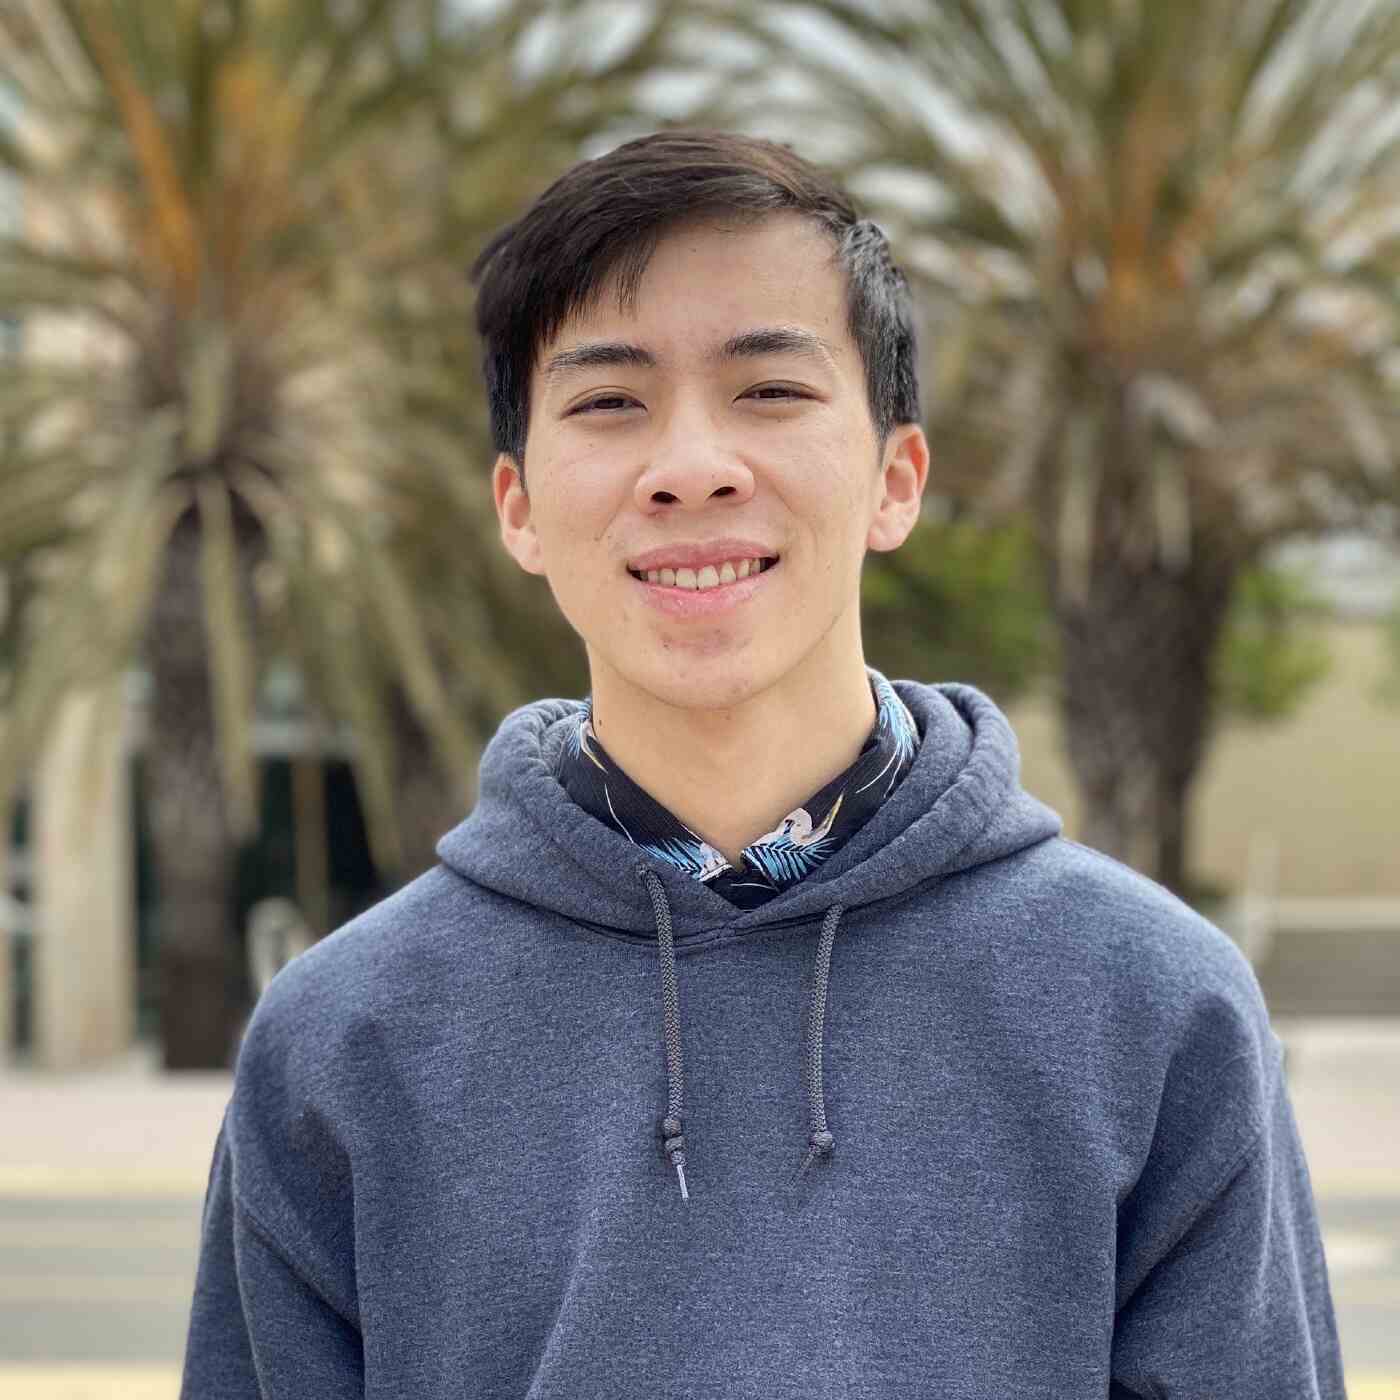 Co Lab Coordinator Bill is interested in the methods—computational and introspective—used to investigate the brain and mind. He recently received his B.S. in psychological and brain sciences and B.A. in philosophy from the University of California, Santa Barbara.